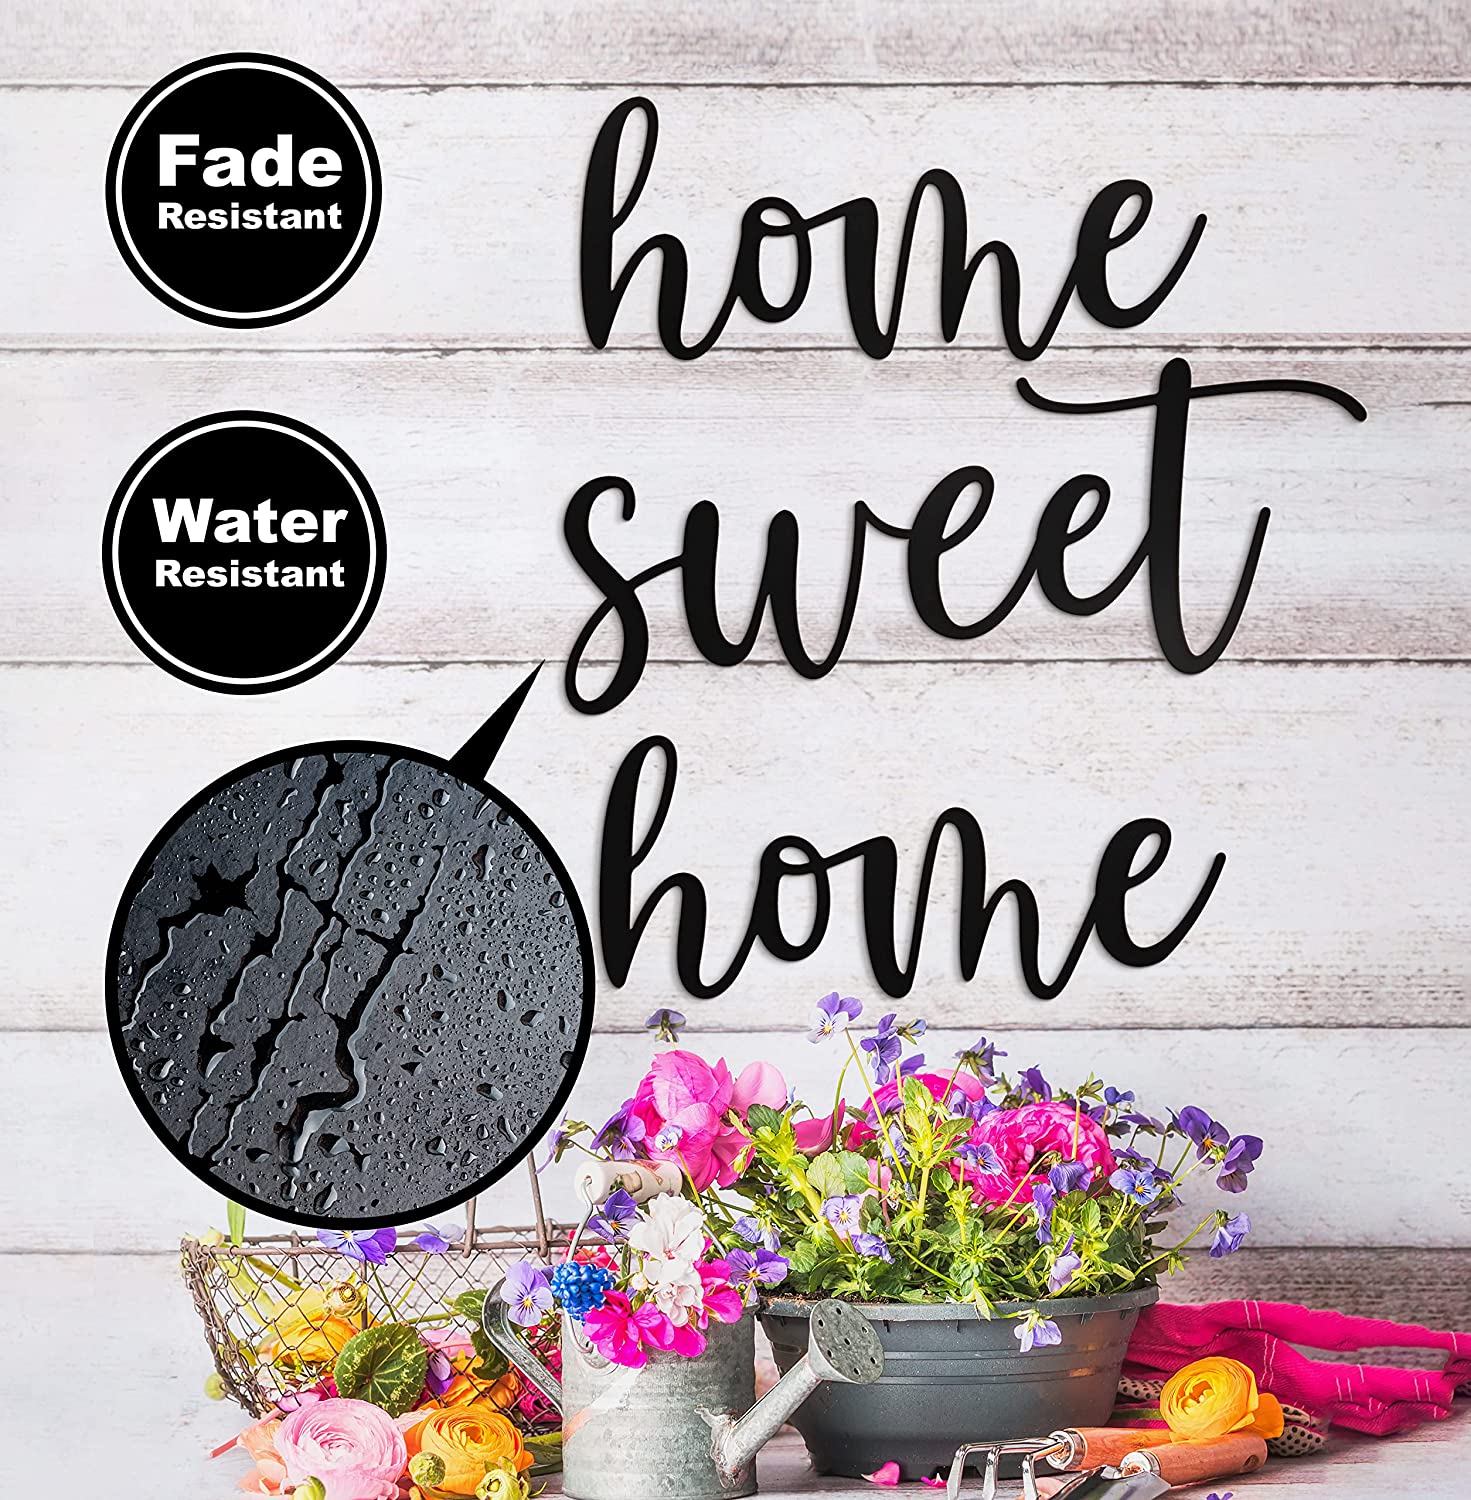 Home Sweet Home Metal Wall Decor - 18"X16" Black Modern Clearance Home Sweet Home Metal farmhouse home sign For Hanging Room Shelf Décor